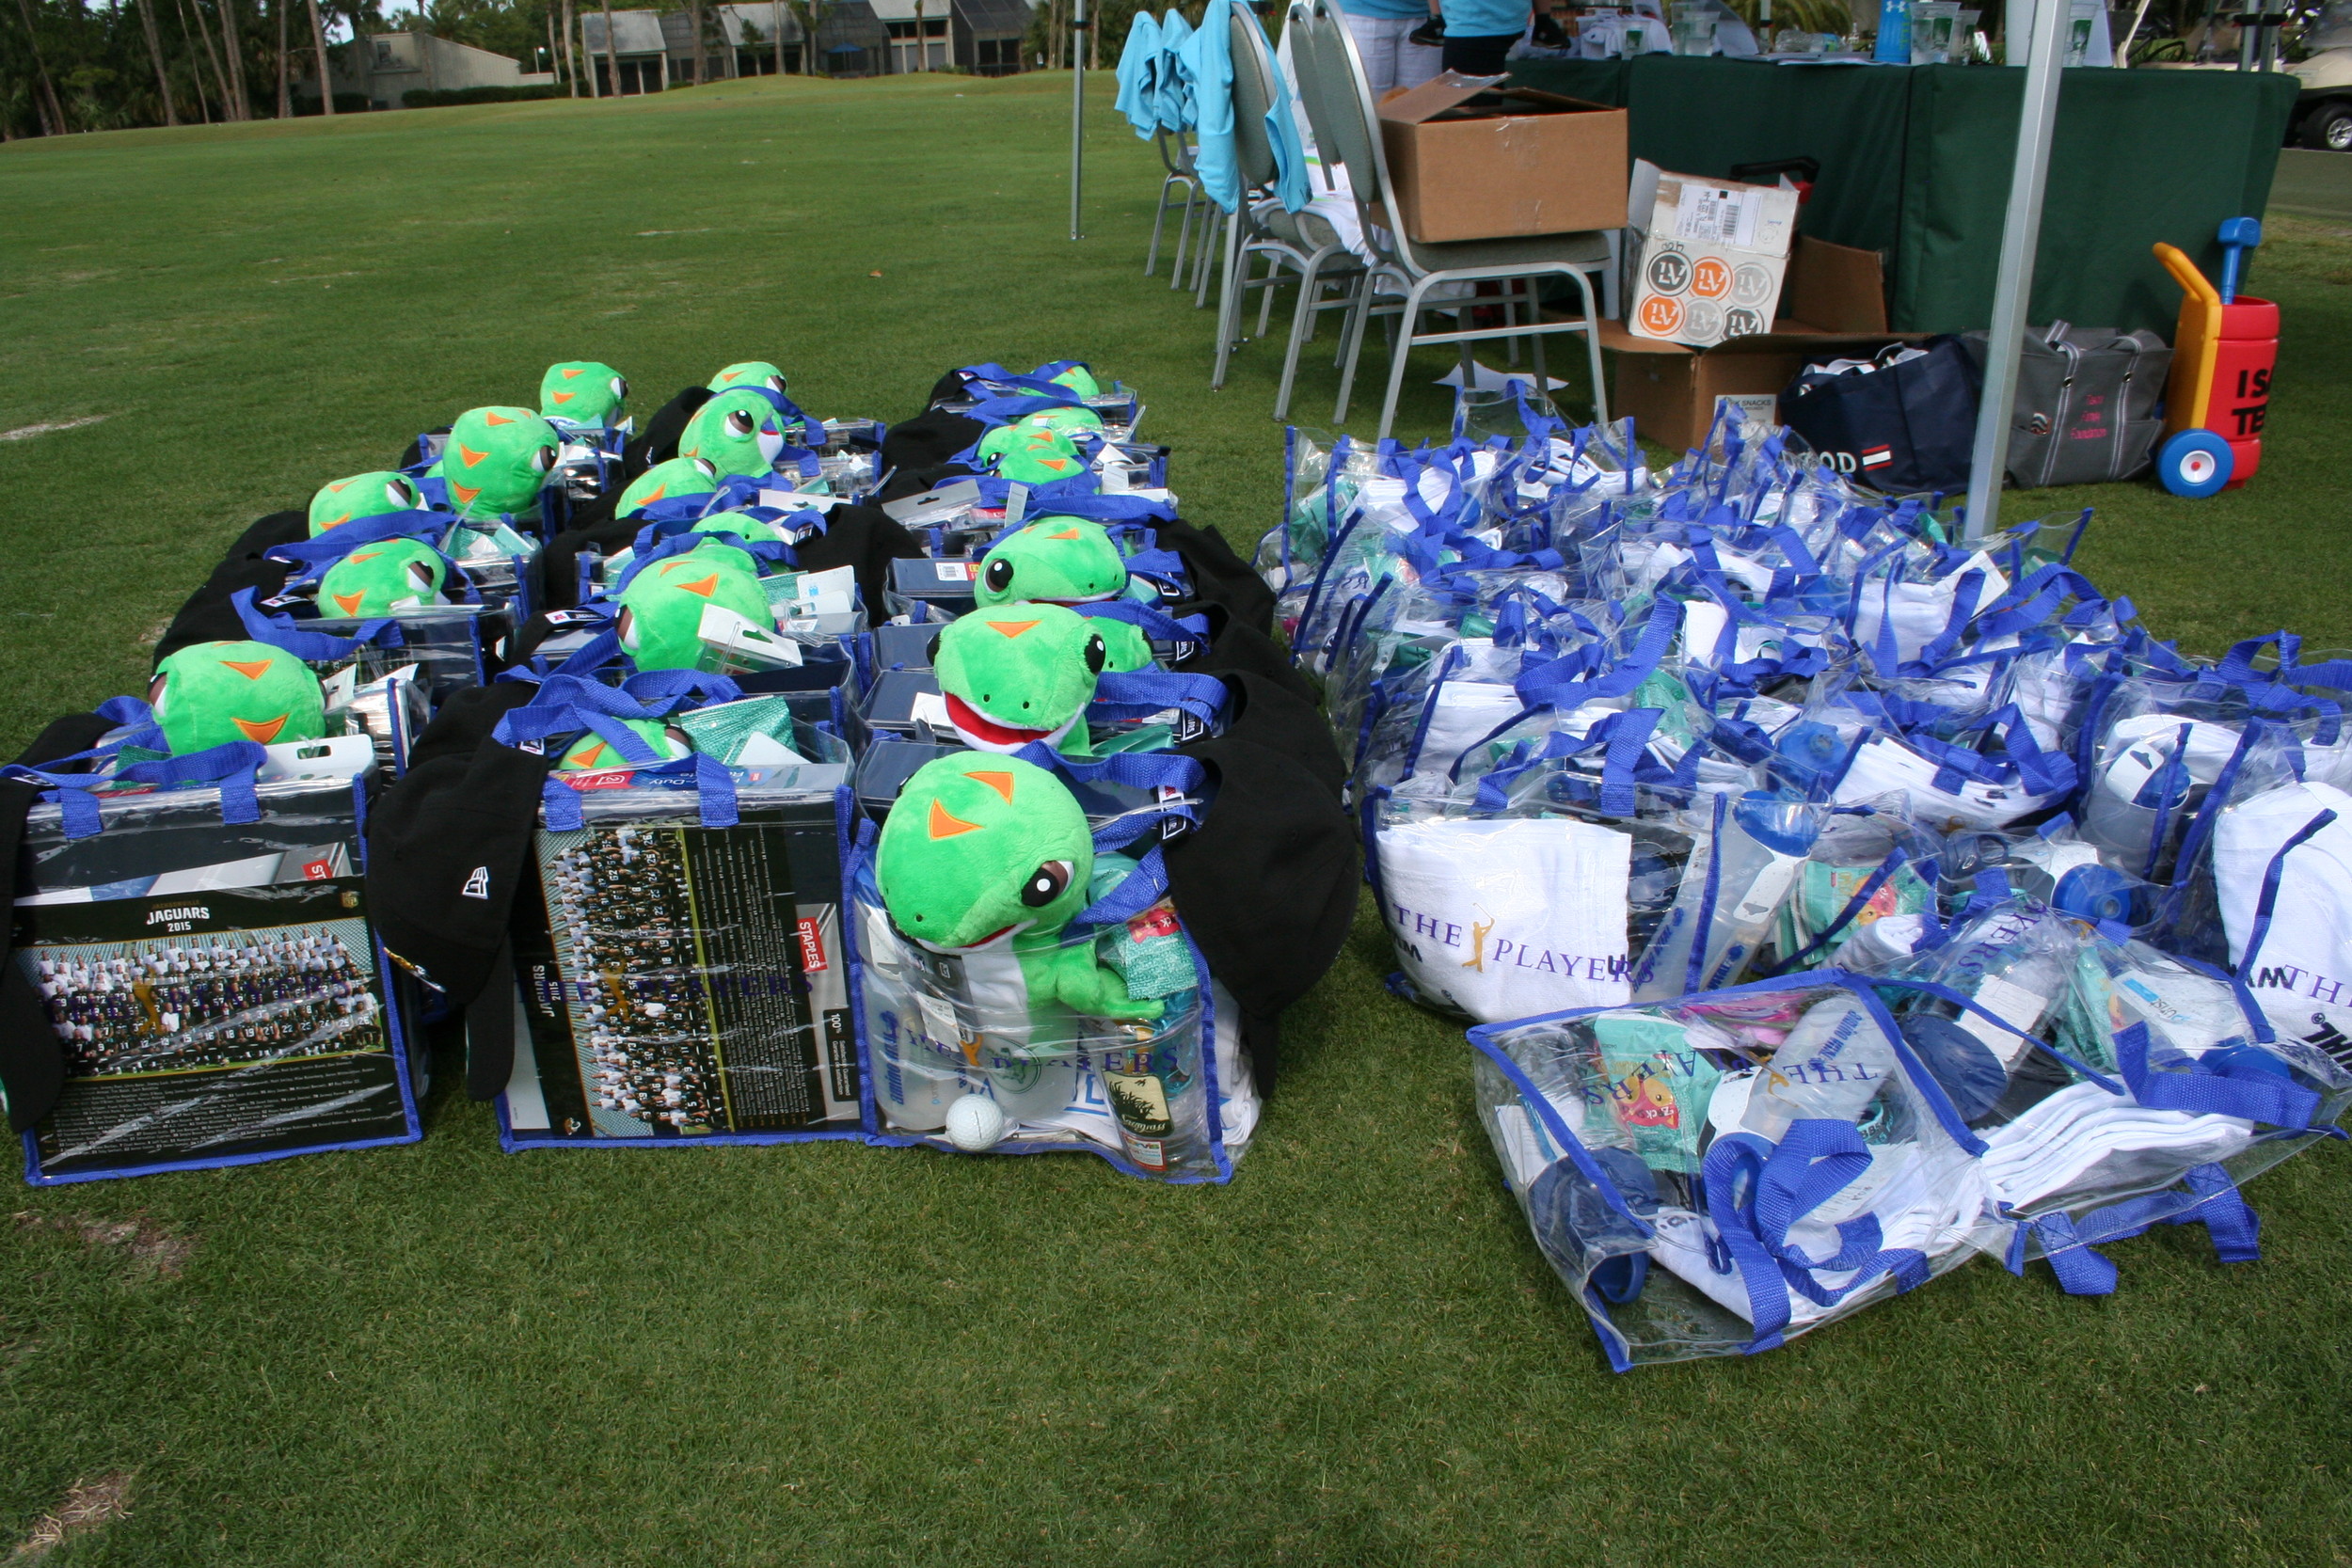 Giveaway bags for the golf clinic participants